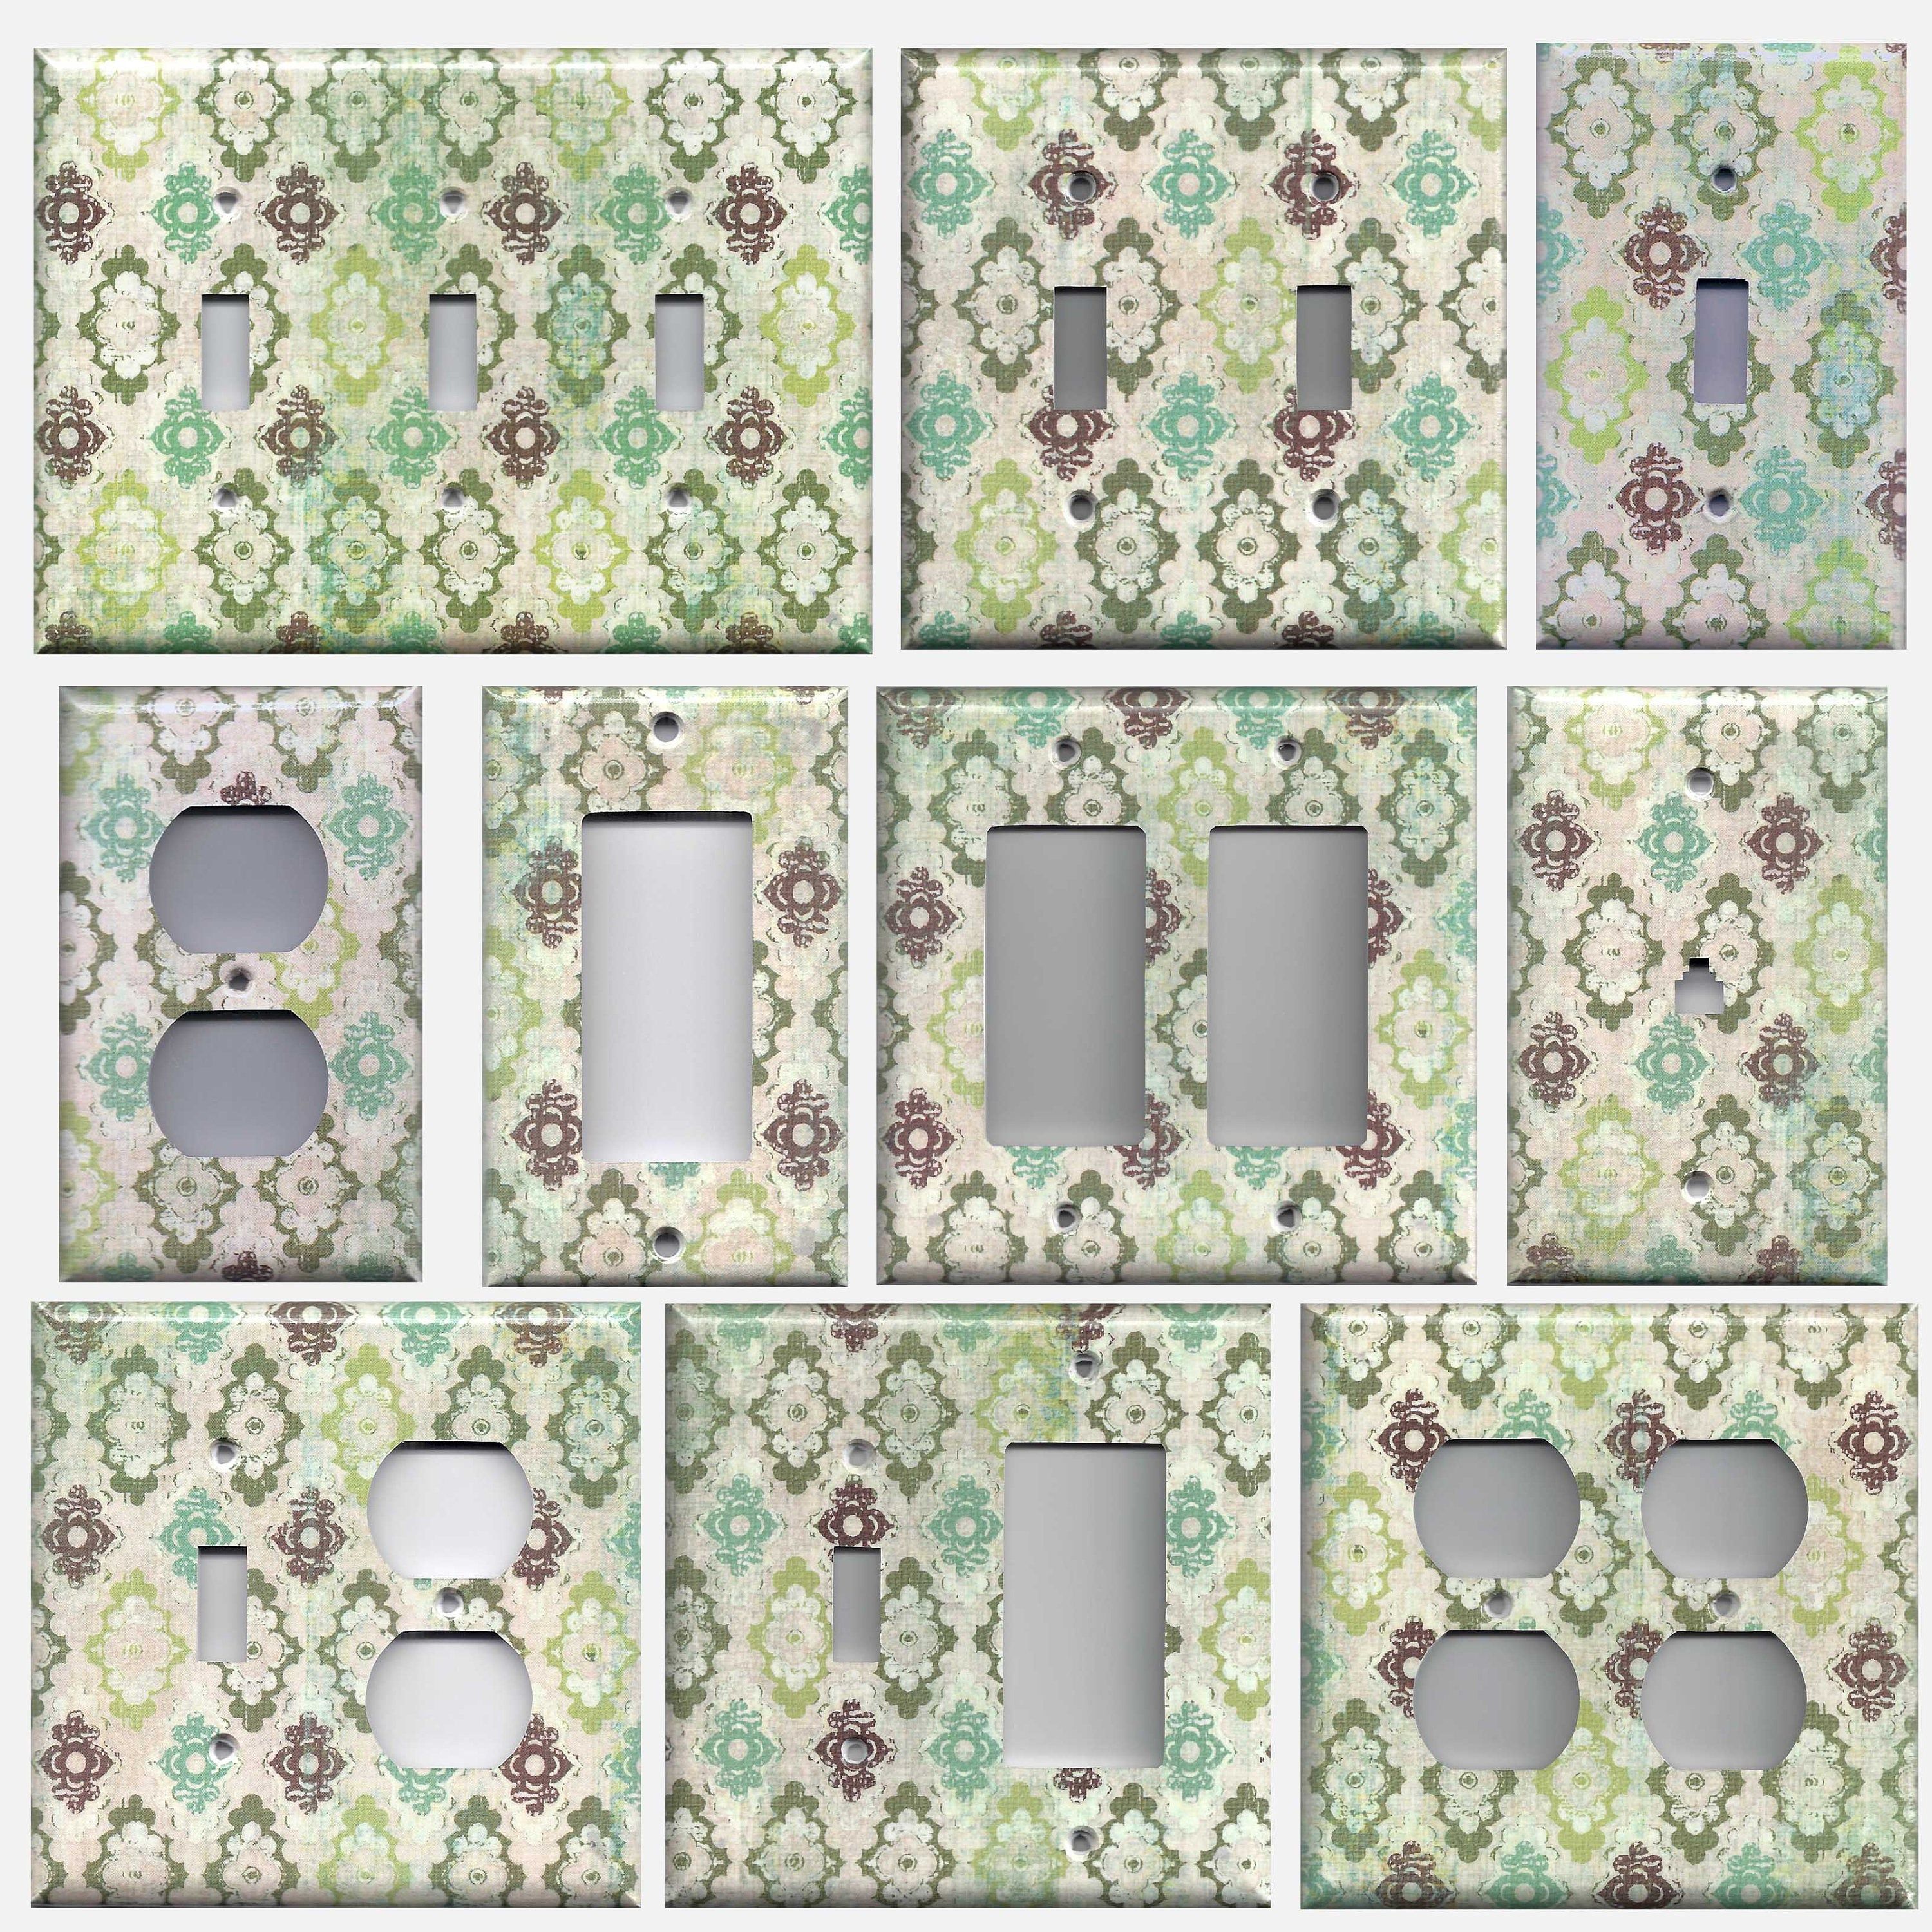 Medallion Wall Art Light Switch Covers And Outlet Plate Covers ; Rustic  Wall Decor, Farm House Decor, Shabby Chic Bathroom Intended For Shabby Medallion Wall Decor (Photo 26 of 30)